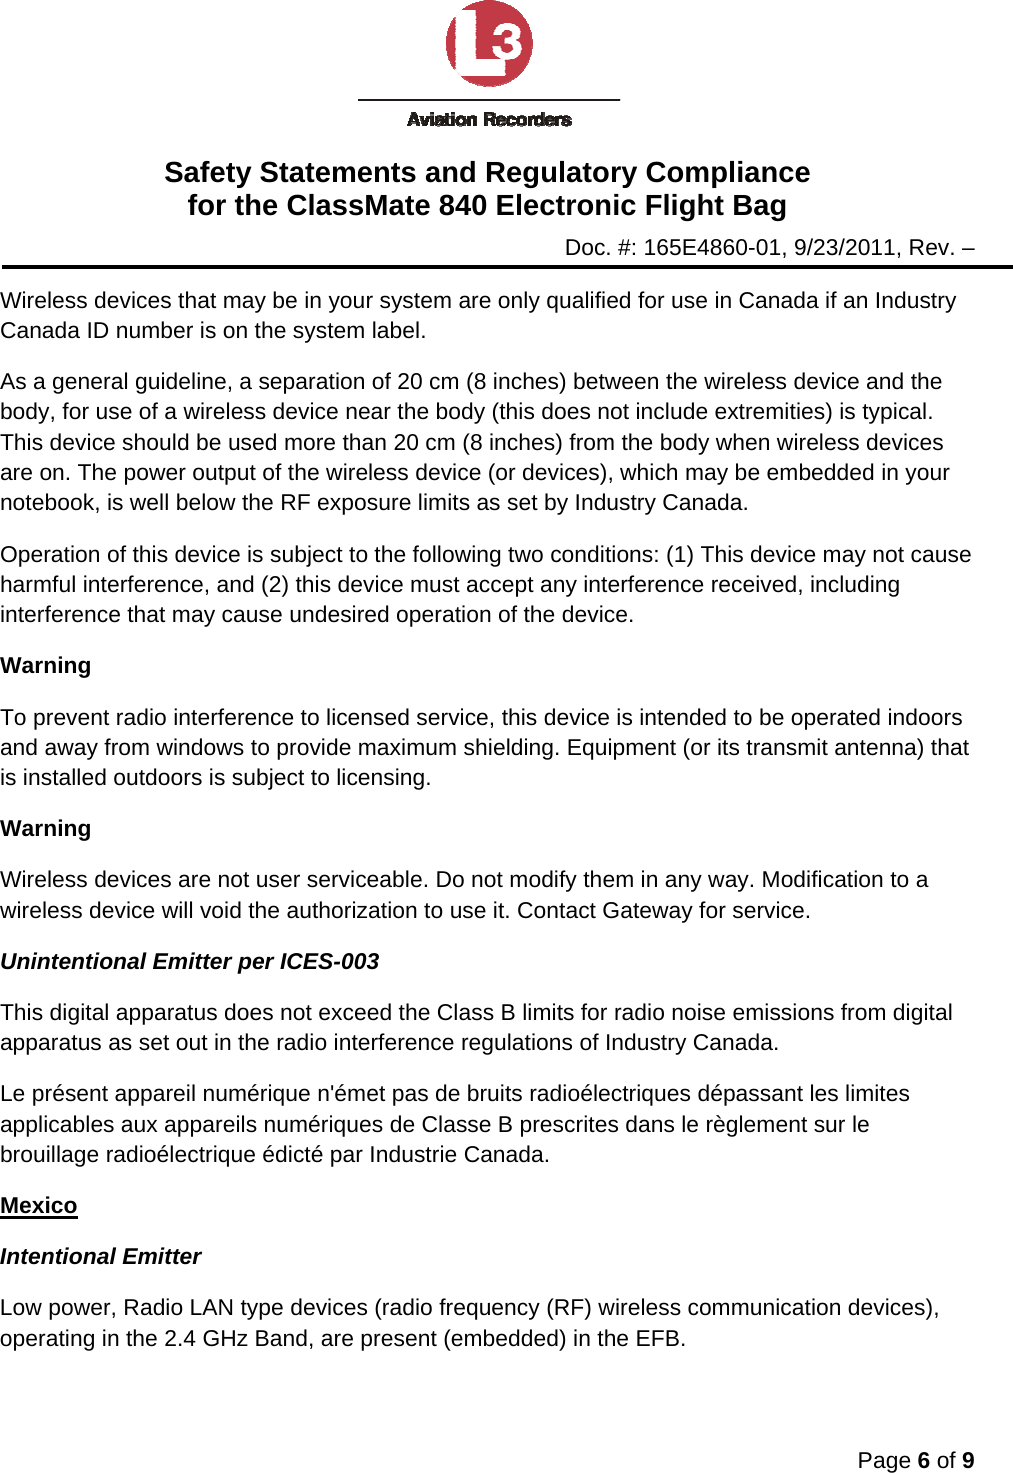 Safety Statements and Regulatory Compliance for the ClassMate 840 Electronic Flight Bag Doc. #: 165E4860-01, 9/23/2011, Rev. –  Page 6 of 9  Wireless devices that may be in your system are only qualified for use in Canada if an Industry Canada ID number is on the system label. As a general guideline, a separation of 20 cm (8 inches) between the wireless device and the body, for use of a wireless device near the body (this does not include extremities) is typical. This device should be used more than 20 cm (8 inches) from the body when wireless devices are on. The power output of the wireless device (or devices), which may be embedded in your notebook, is well below the RF exposure limits as set by Industry Canada. Operation of this device is subject to the following two conditions: (1) This device may not cause harmful interference, and (2) this device must accept any interference received, including interference that may cause undesired operation of the device. Warning To prevent radio interference to licensed service, this device is intended to be operated indoors and away from windows to provide maximum shielding. Equipment (or its transmit antenna) that is installed outdoors is subject to licensing. Warning Wireless devices are not user serviceable. Do not modify them in any way. Modification to a wireless device will void the authorization to use it. Contact Gateway for service. Unintentional Emitter per ICES-003 This digital apparatus does not exceed the Class B limits for radio noise emissions from digital apparatus as set out in the radio interference regulations of Industry Canada. Le présent appareil numérique n&apos;émet pas de bruits radioélectriques dépassant les limites applicables aux appareils numériques de Classe B prescrites dans le règlement sur le brouillage radioélectrique édicté par Industrie Canada. Mexico Intentional Emitter Low power, Radio LAN type devices (radio frequency (RF) wireless communication devices), operating in the 2.4 GHz Band, are present (embedded) in the EFB.  